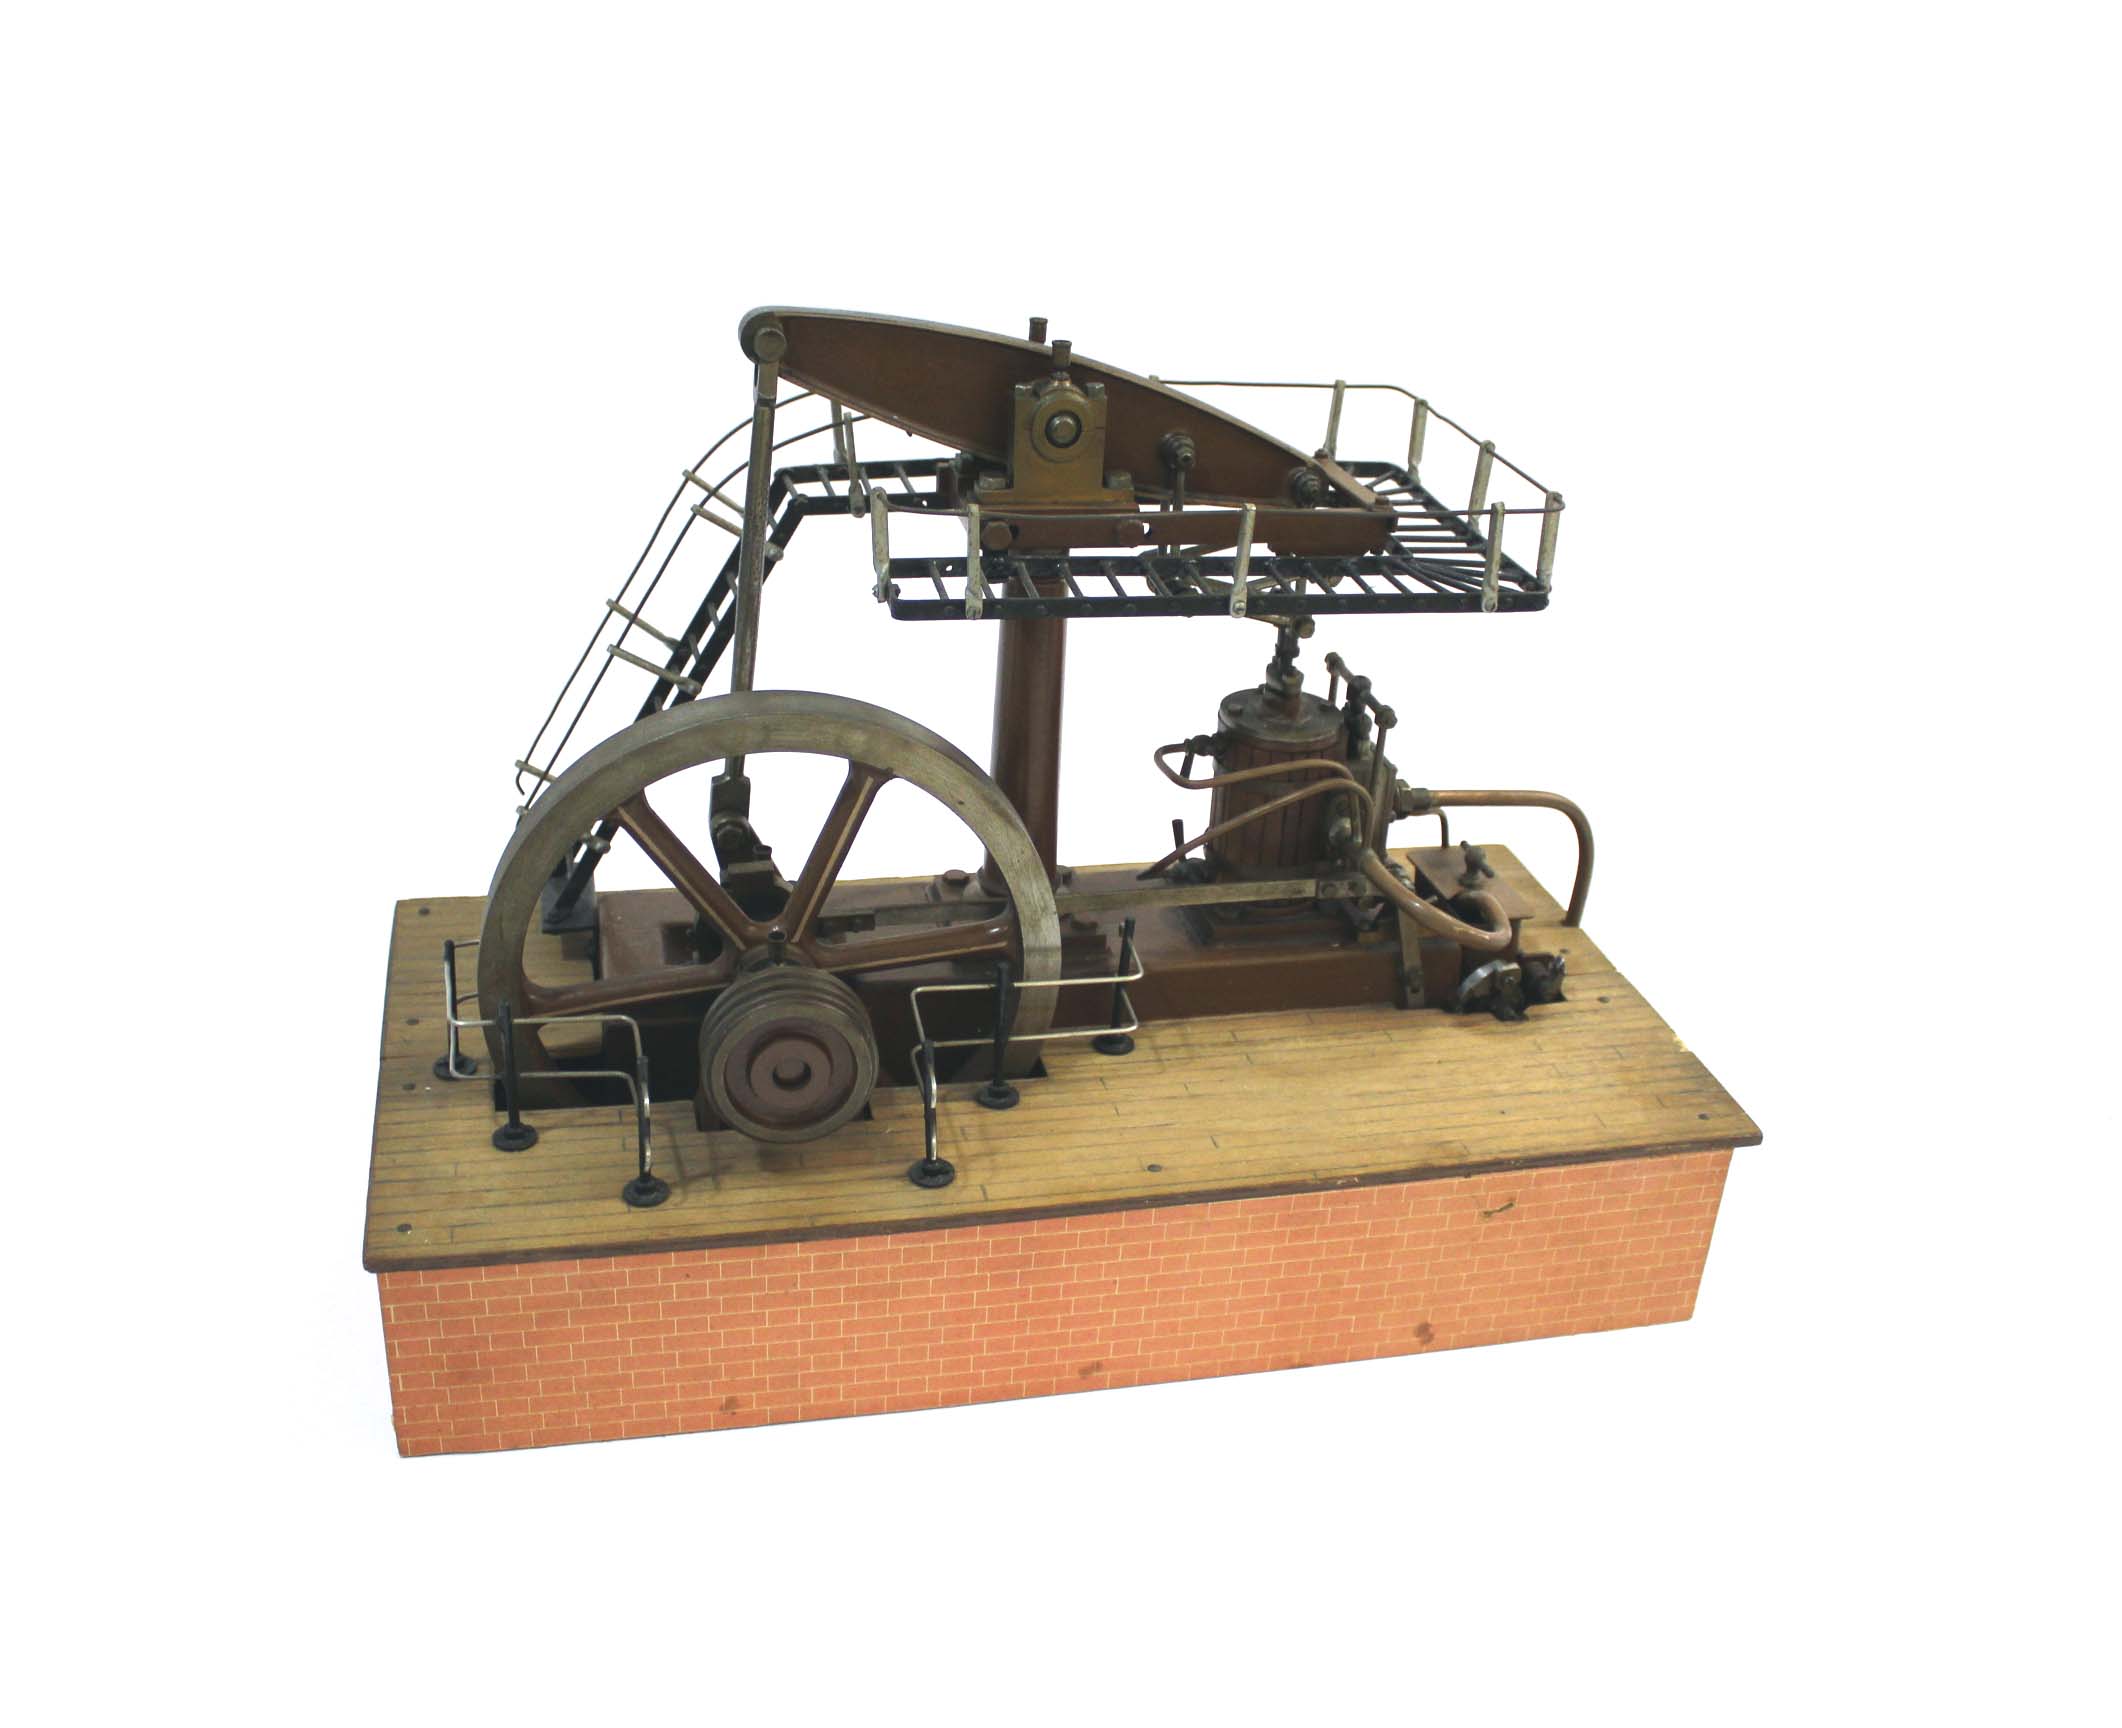 MODEL STEAM ENGINE - BEAM ENGINE a model steam beam engine, with overhung crank. The beam surrounded